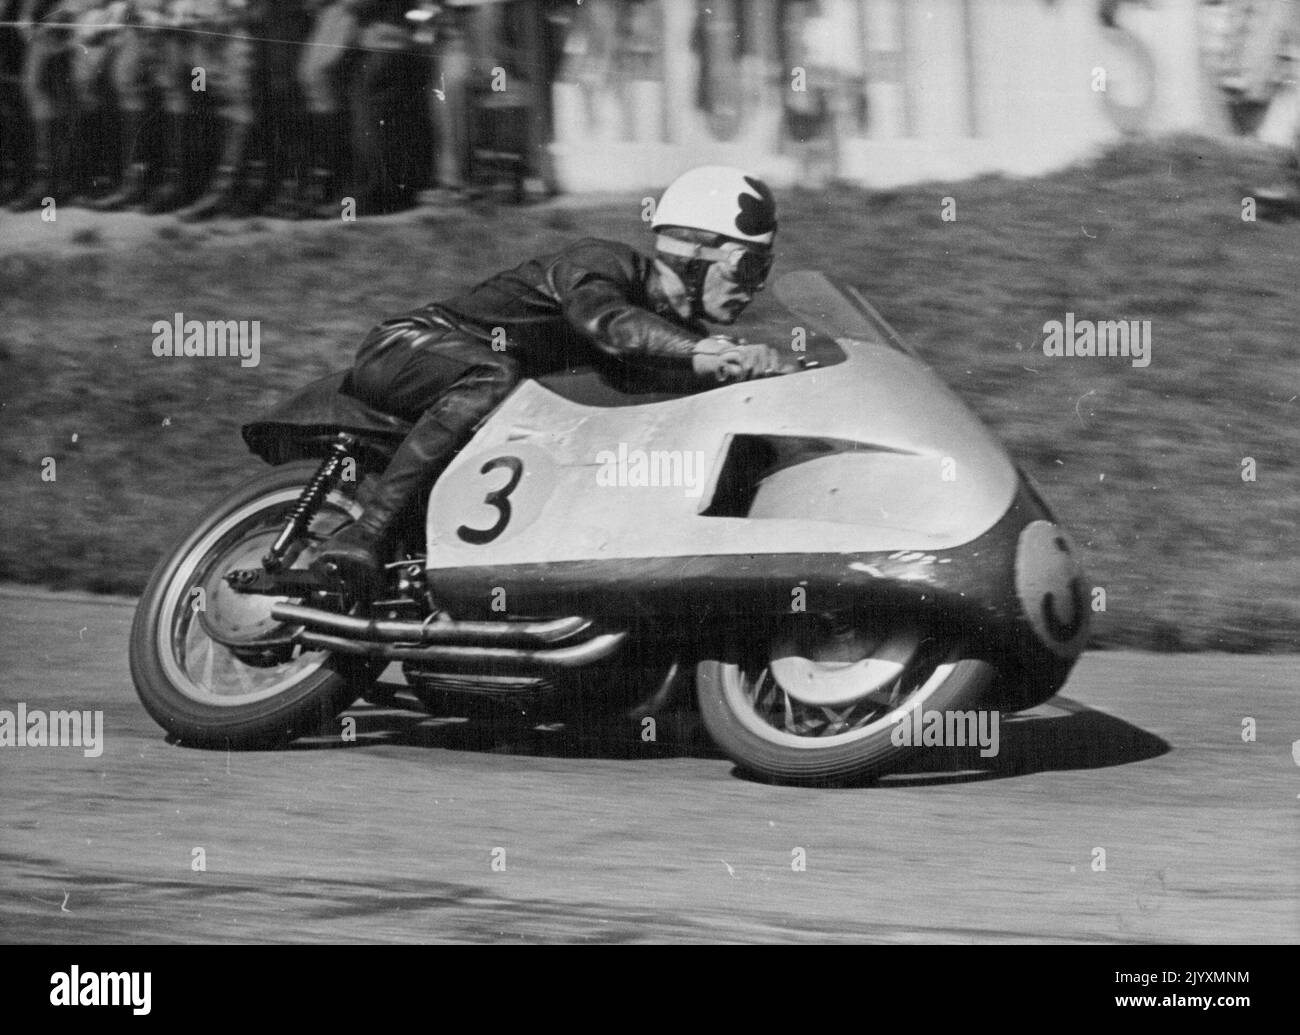 Duke Does it Again - Reg Armstrong of Australia piloted his Gilera to third place in the 500 C.C. Race at Hockenheim, behind Geoff Duke and Ken Kavanagh. Geoff Duke, Britain's World 500 CC Motorcycle Champion Robe his 500 CC Gilera to victory in the Rhine cup races at Hockenheim, Germany on Sunday. More than 120,000 fans saw him set up a lap record of 123.83 miles an hour. He covered the 20 laps in 47 minutes 12.5 seconds. Ken Kavanagh of Australia was second in this event and also won the 350 CC Race on his Moto-Gizzi at 111.84 miles an hour. May 10, 1955. (Photo by Paul Popper). Stock Photo